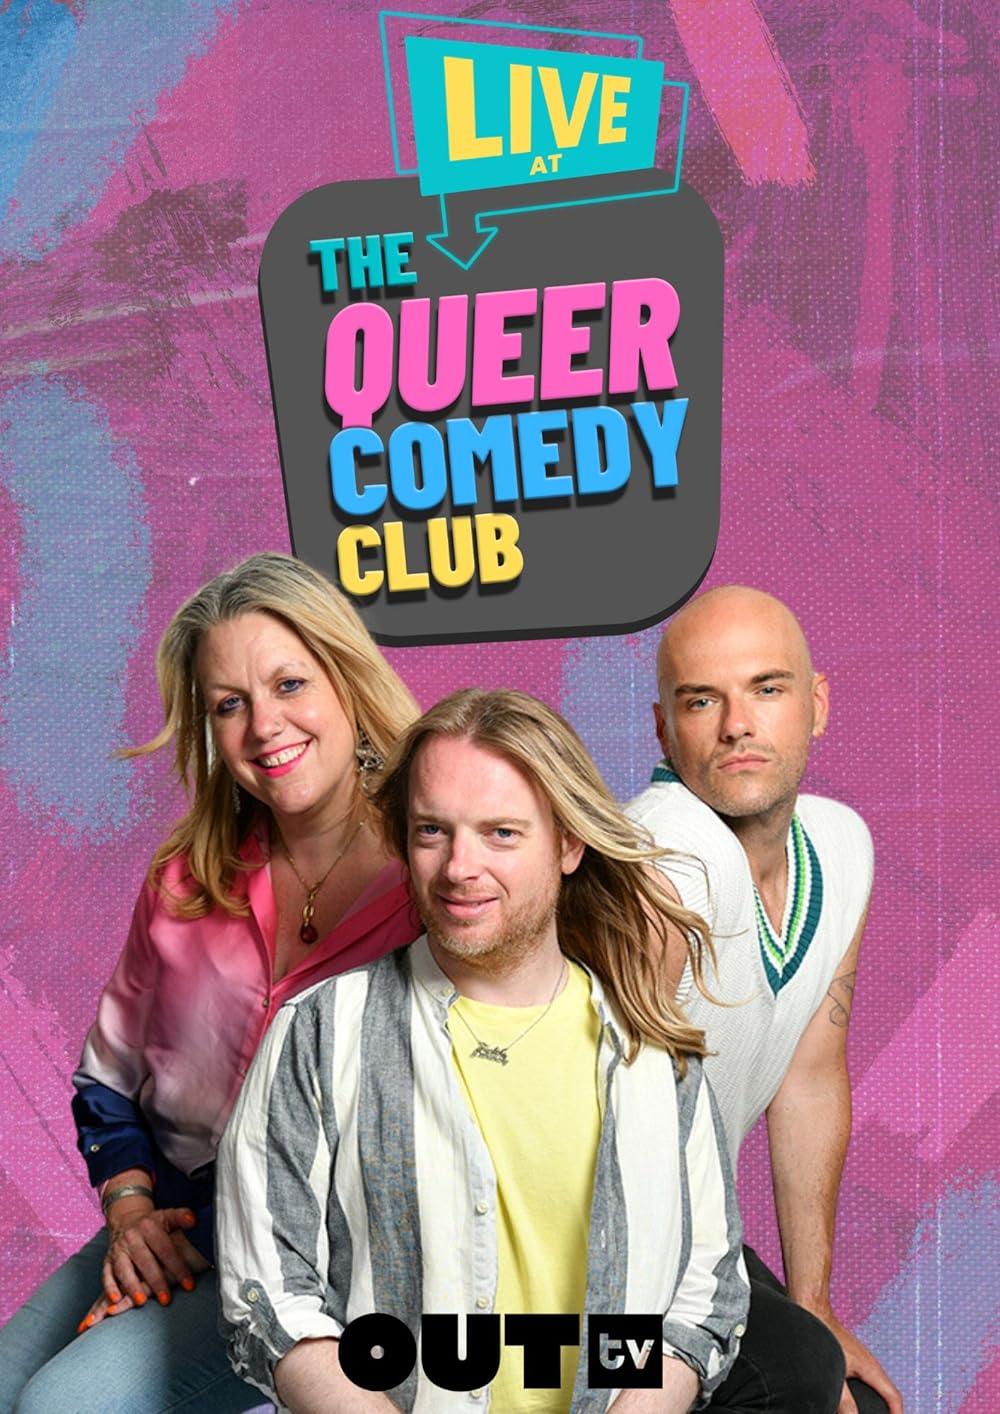 Live at the Queer Comedy Club